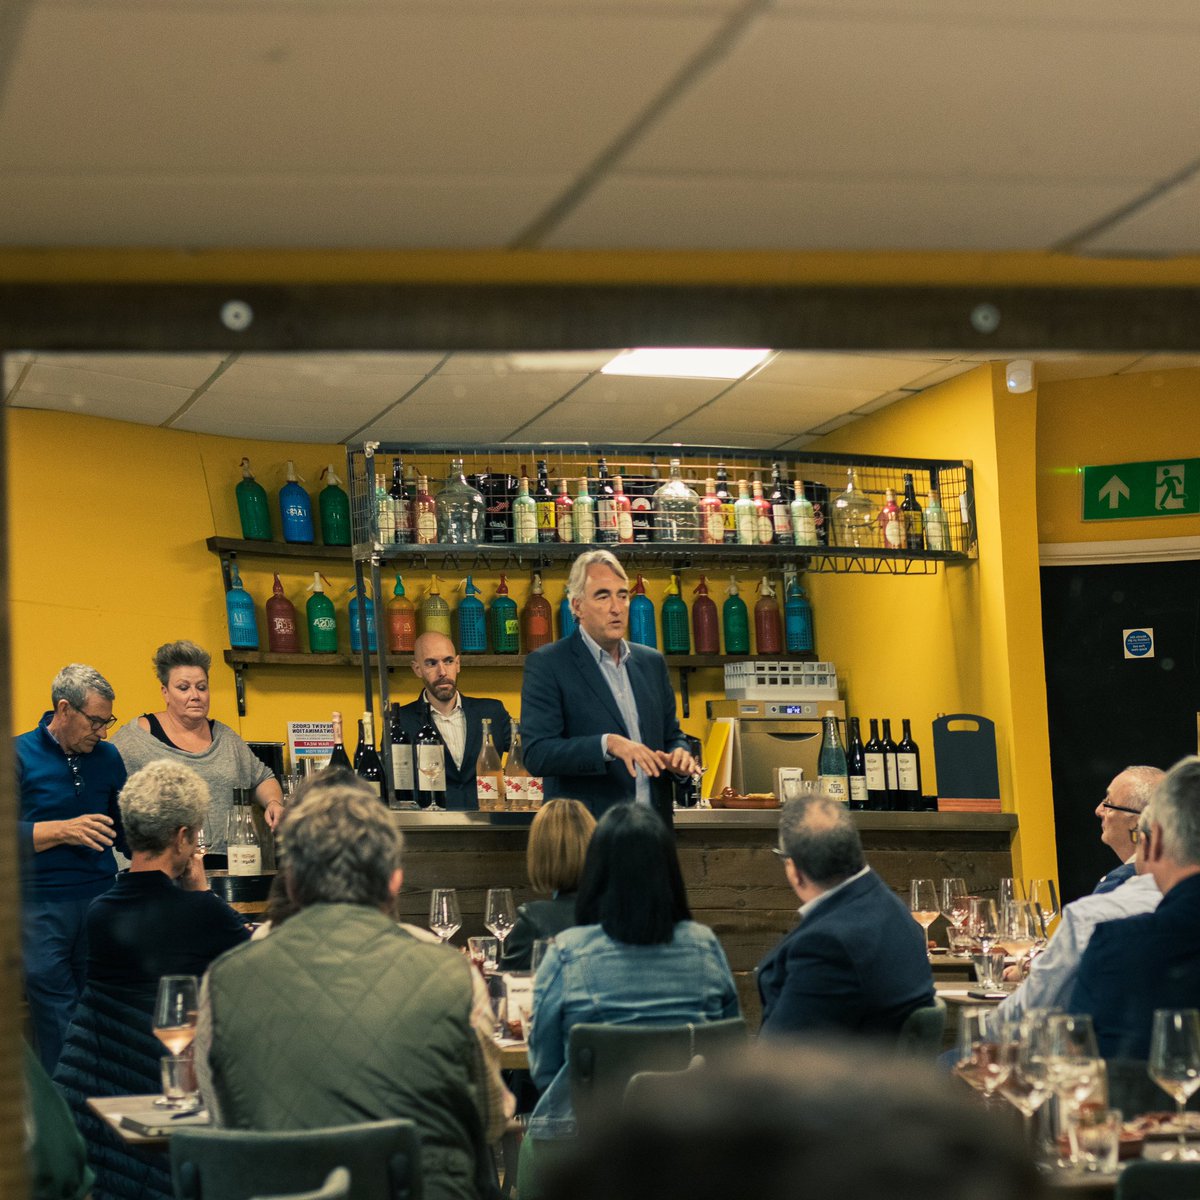 It’s always a pleasure welcoming @bodegasmuga to Cardiff. Who better to be the first to host a tasting on our new mezzanine! 

Stay tuned for tastings to be announced! @CandDWines @ultracomida @RiojaWine 
#riojamonth